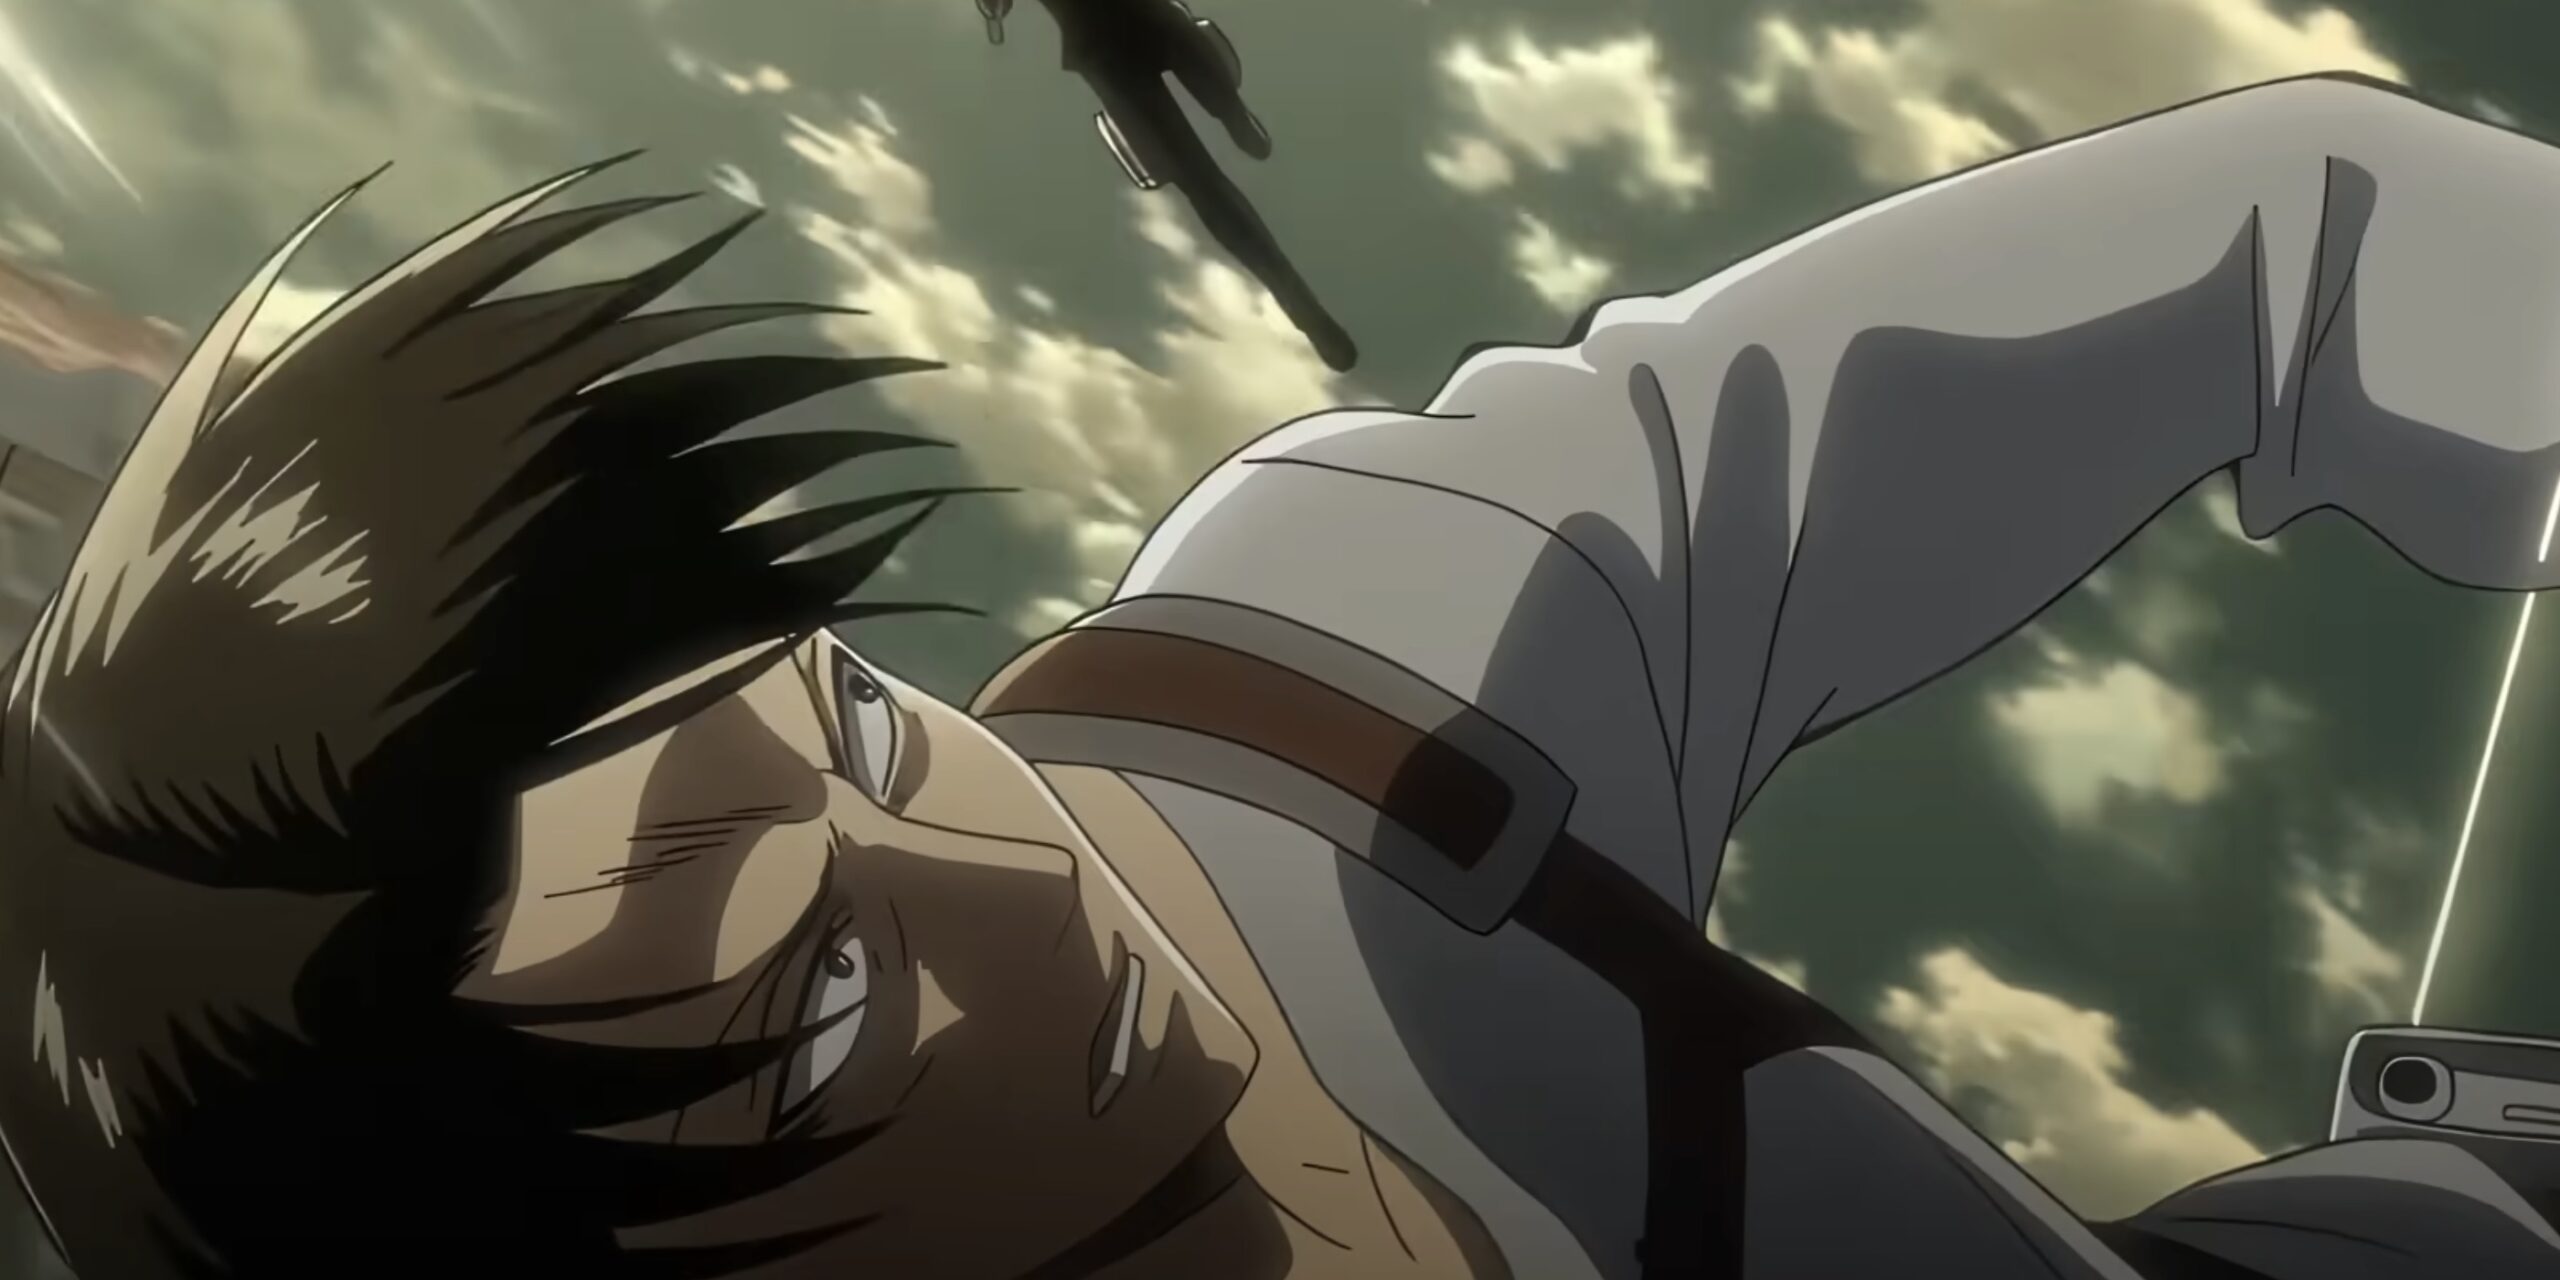 Is Levi More Powerful than Mikasa?